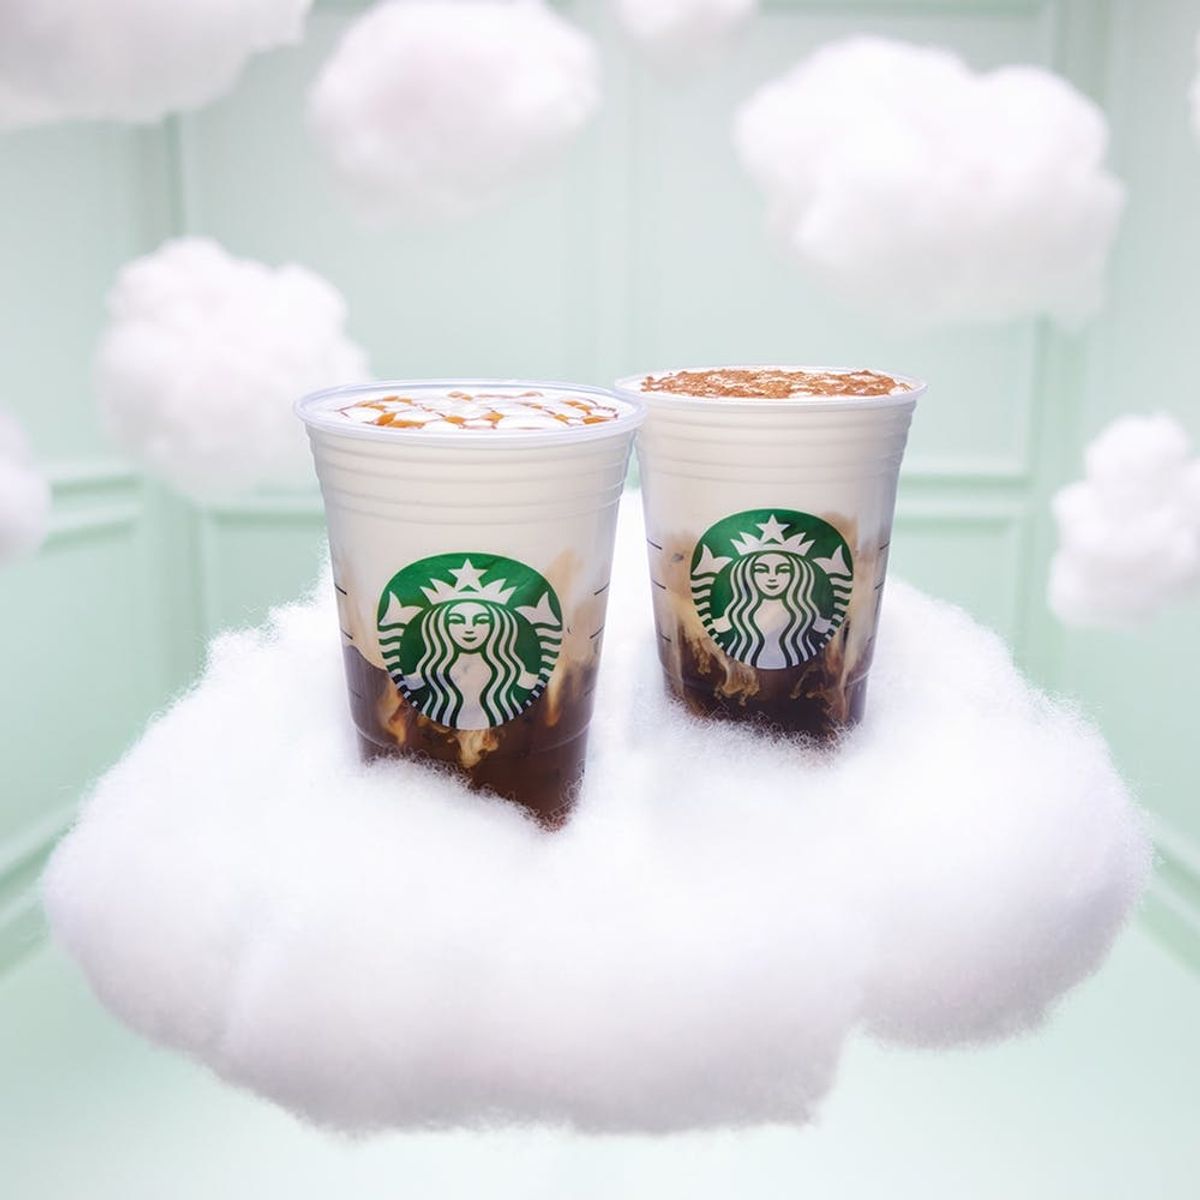 You’ll Be on Cloud Nine With Starbucks’s New Dreamy, Foamy Drinks